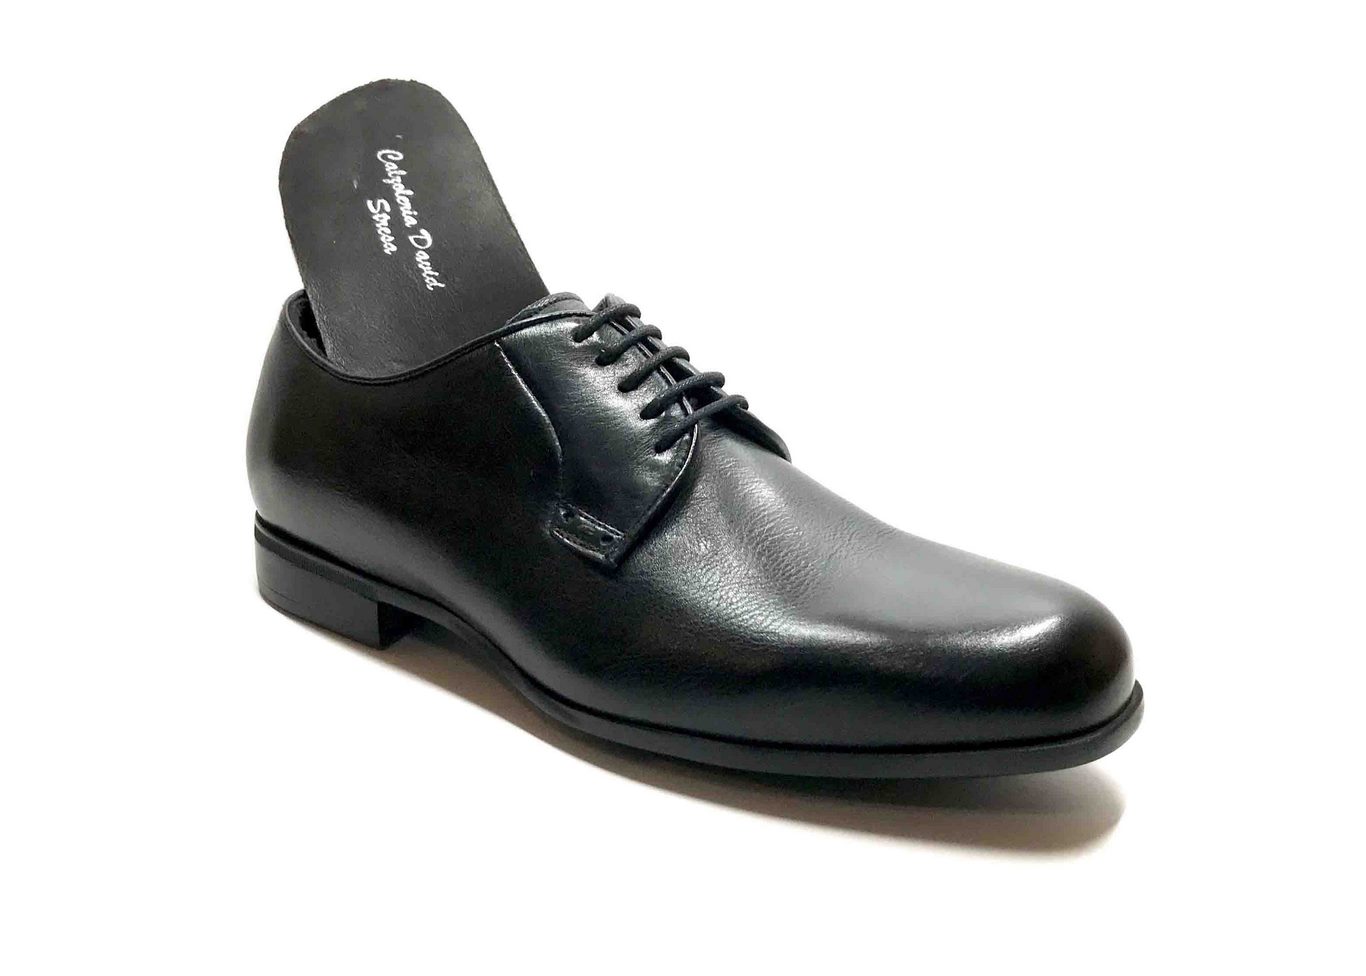 Comfort Laced with removable insoles in Black leather